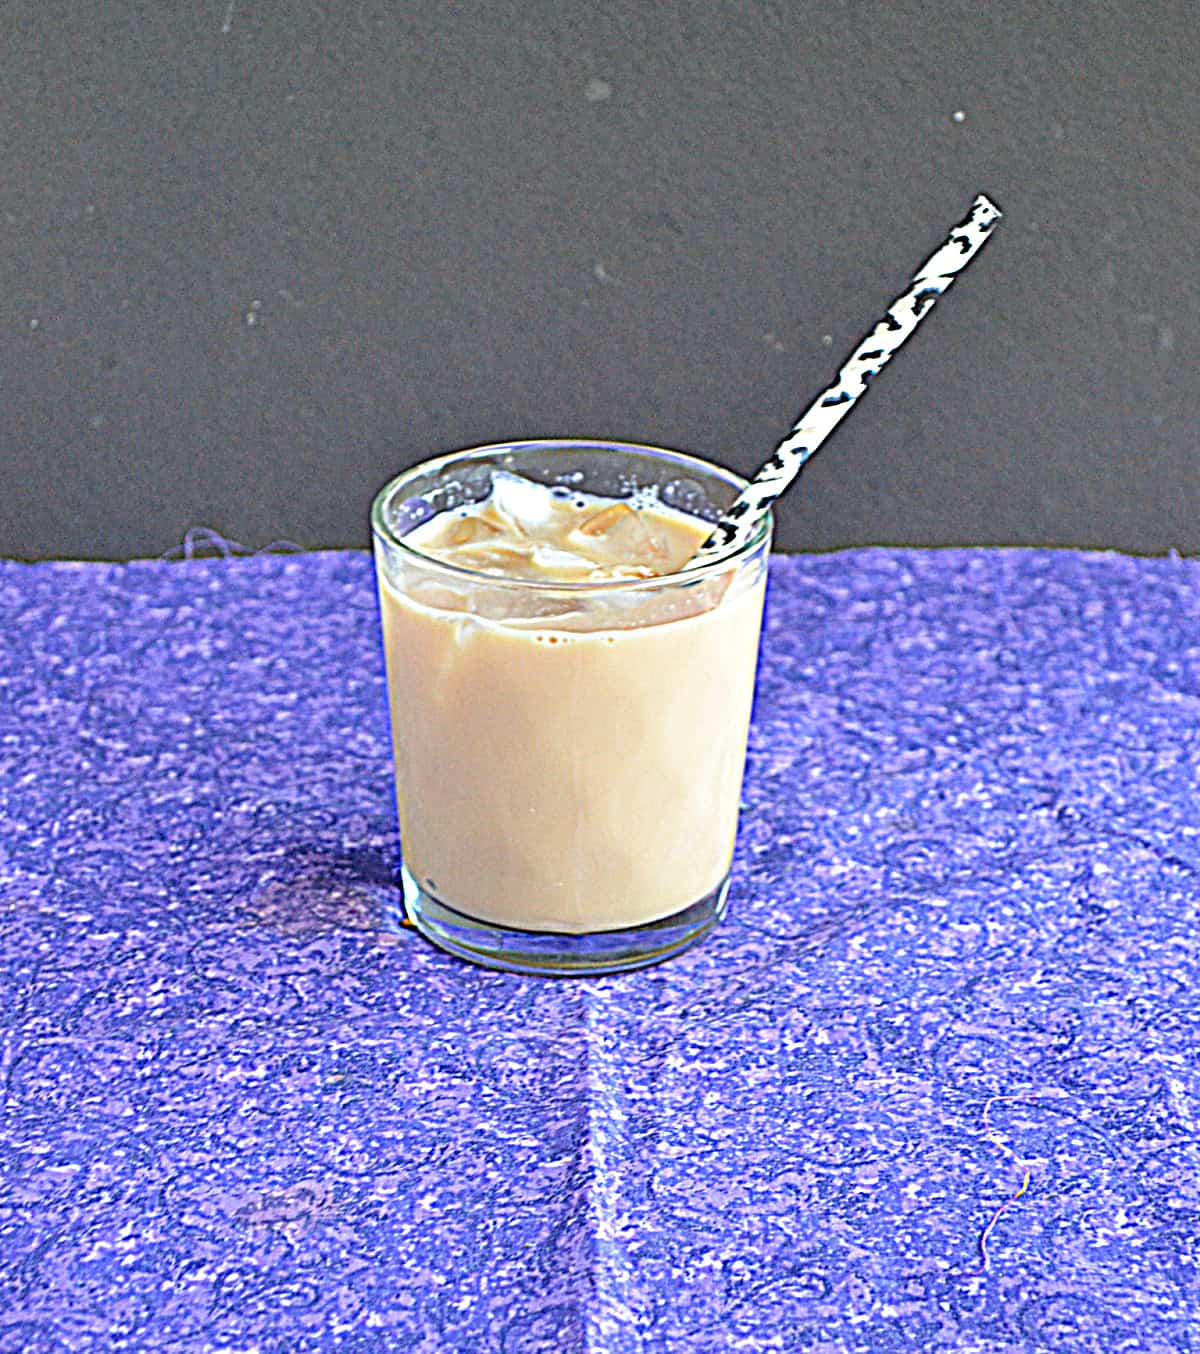 A glass of iced tea latte over ice with a straw.